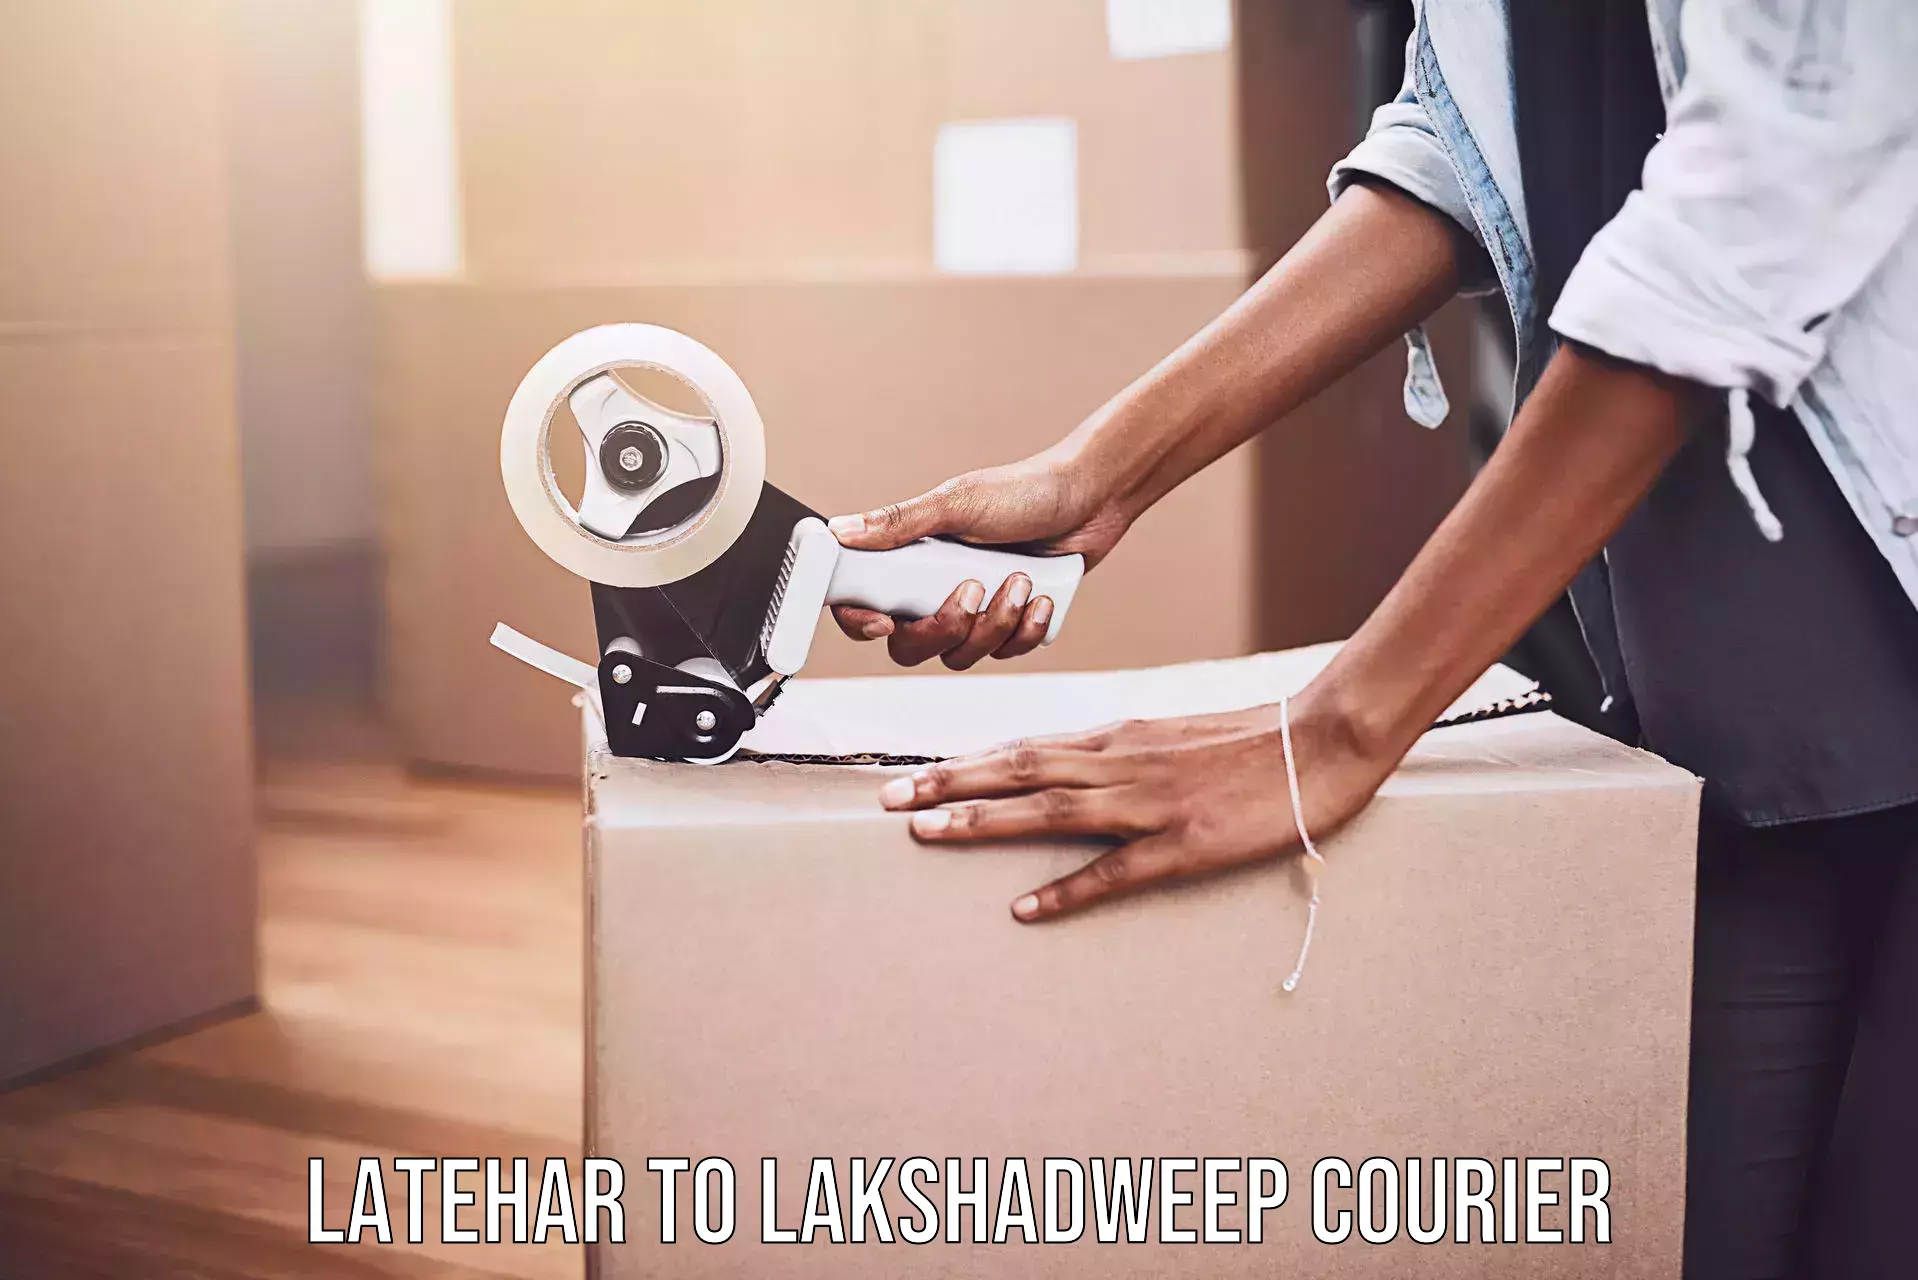 Professional courier handling in Latehar to Lakshadweep